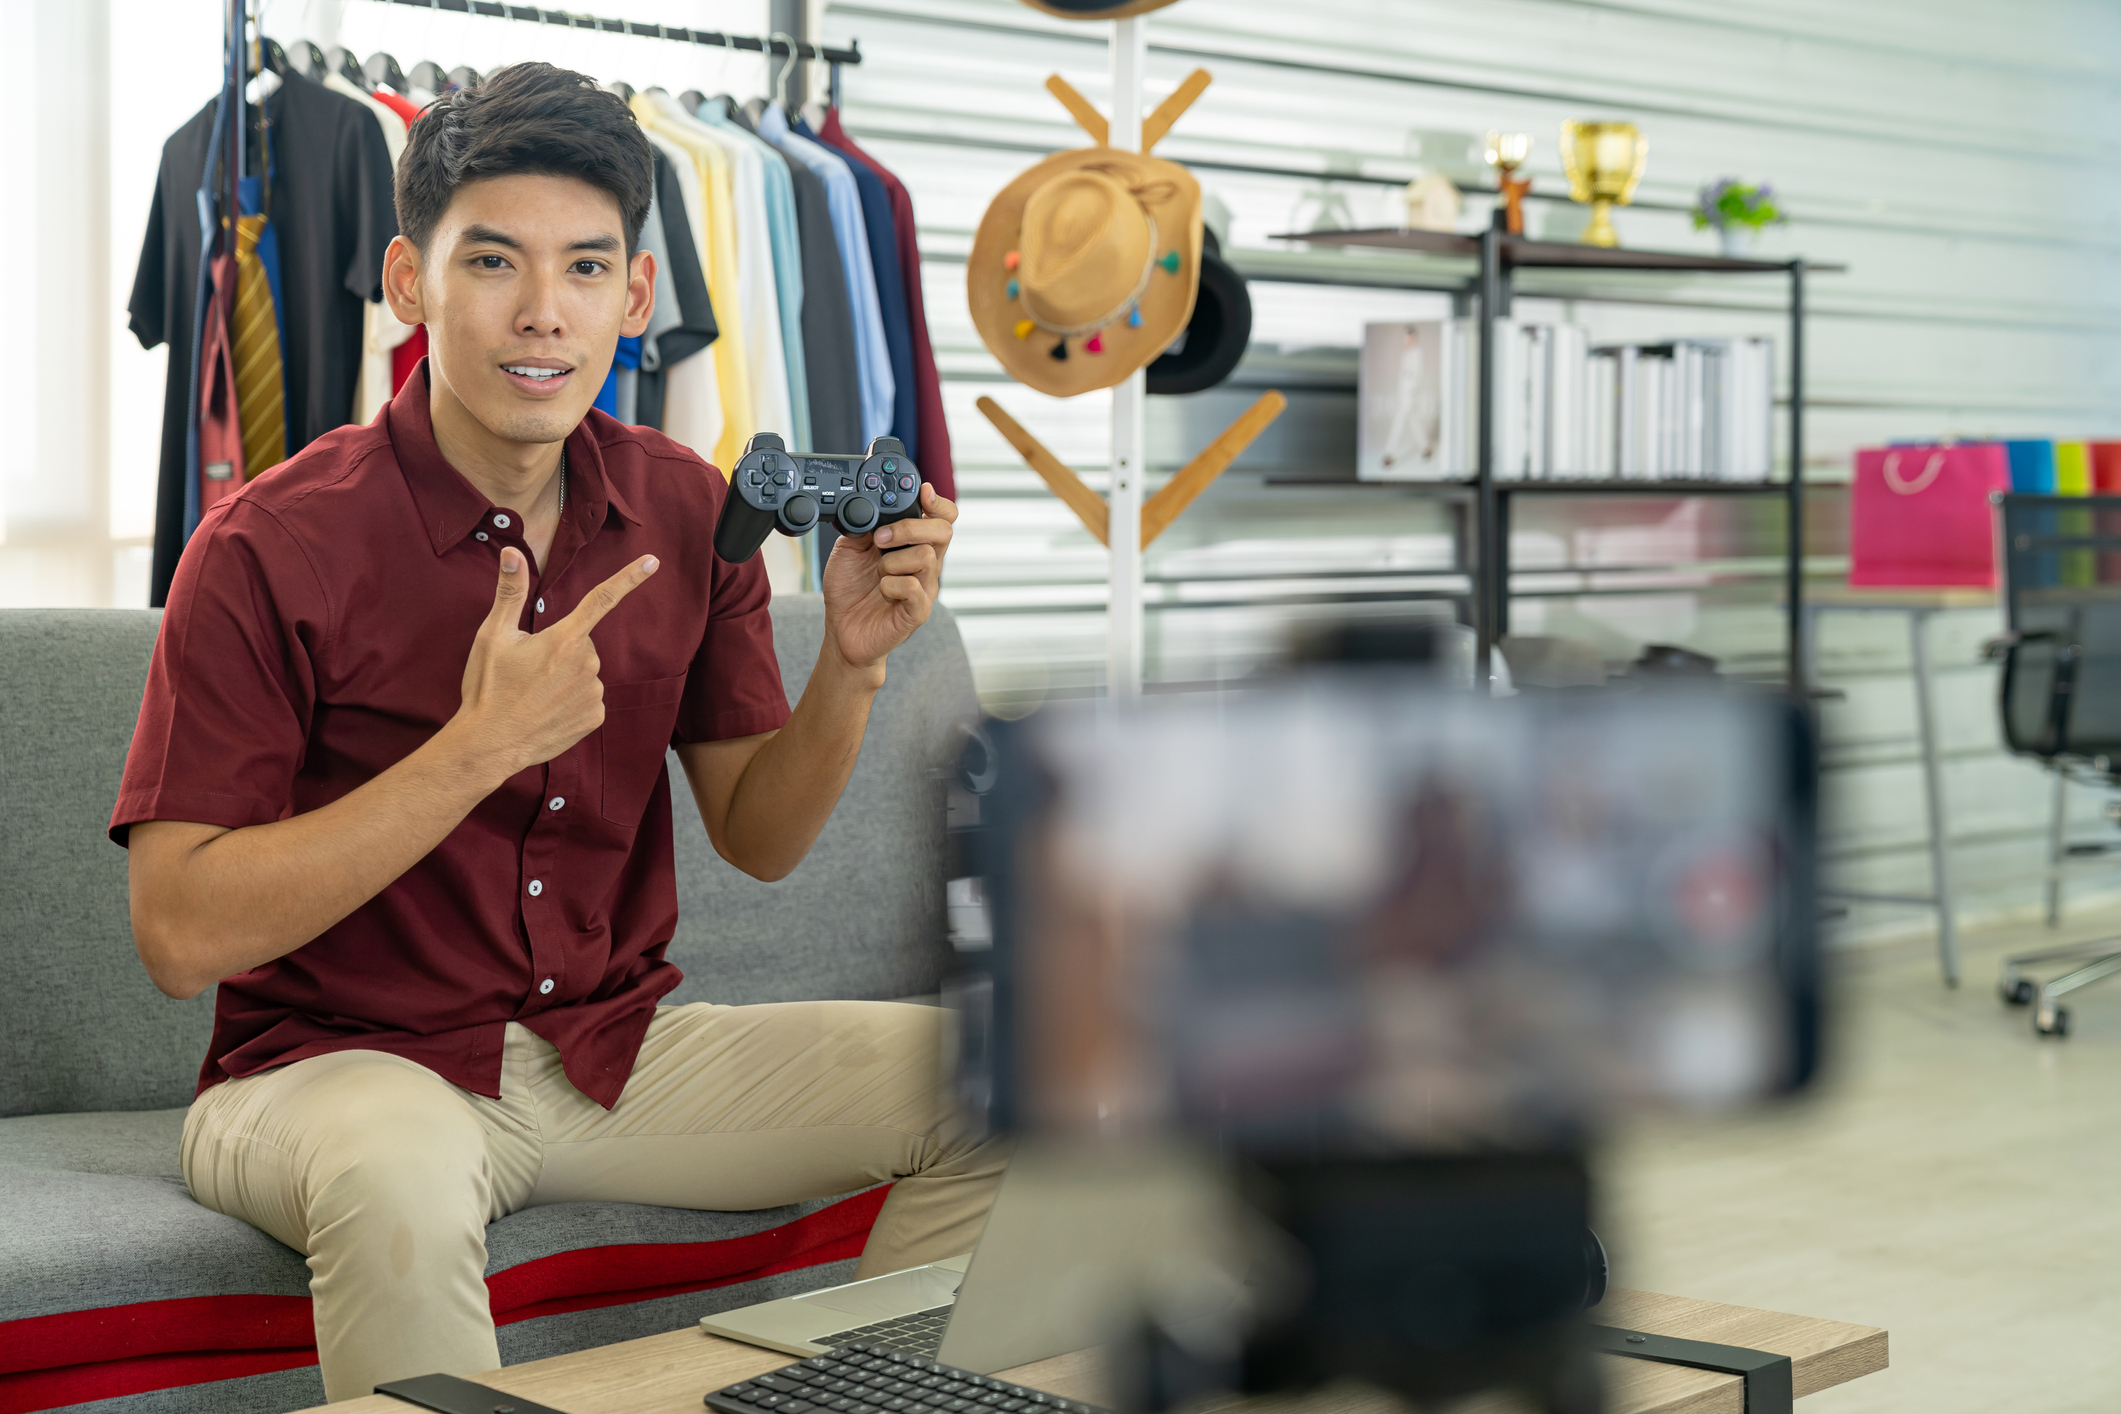 brand influencer holding up computer game controller in front of video captured on smart phone for marketing purposes